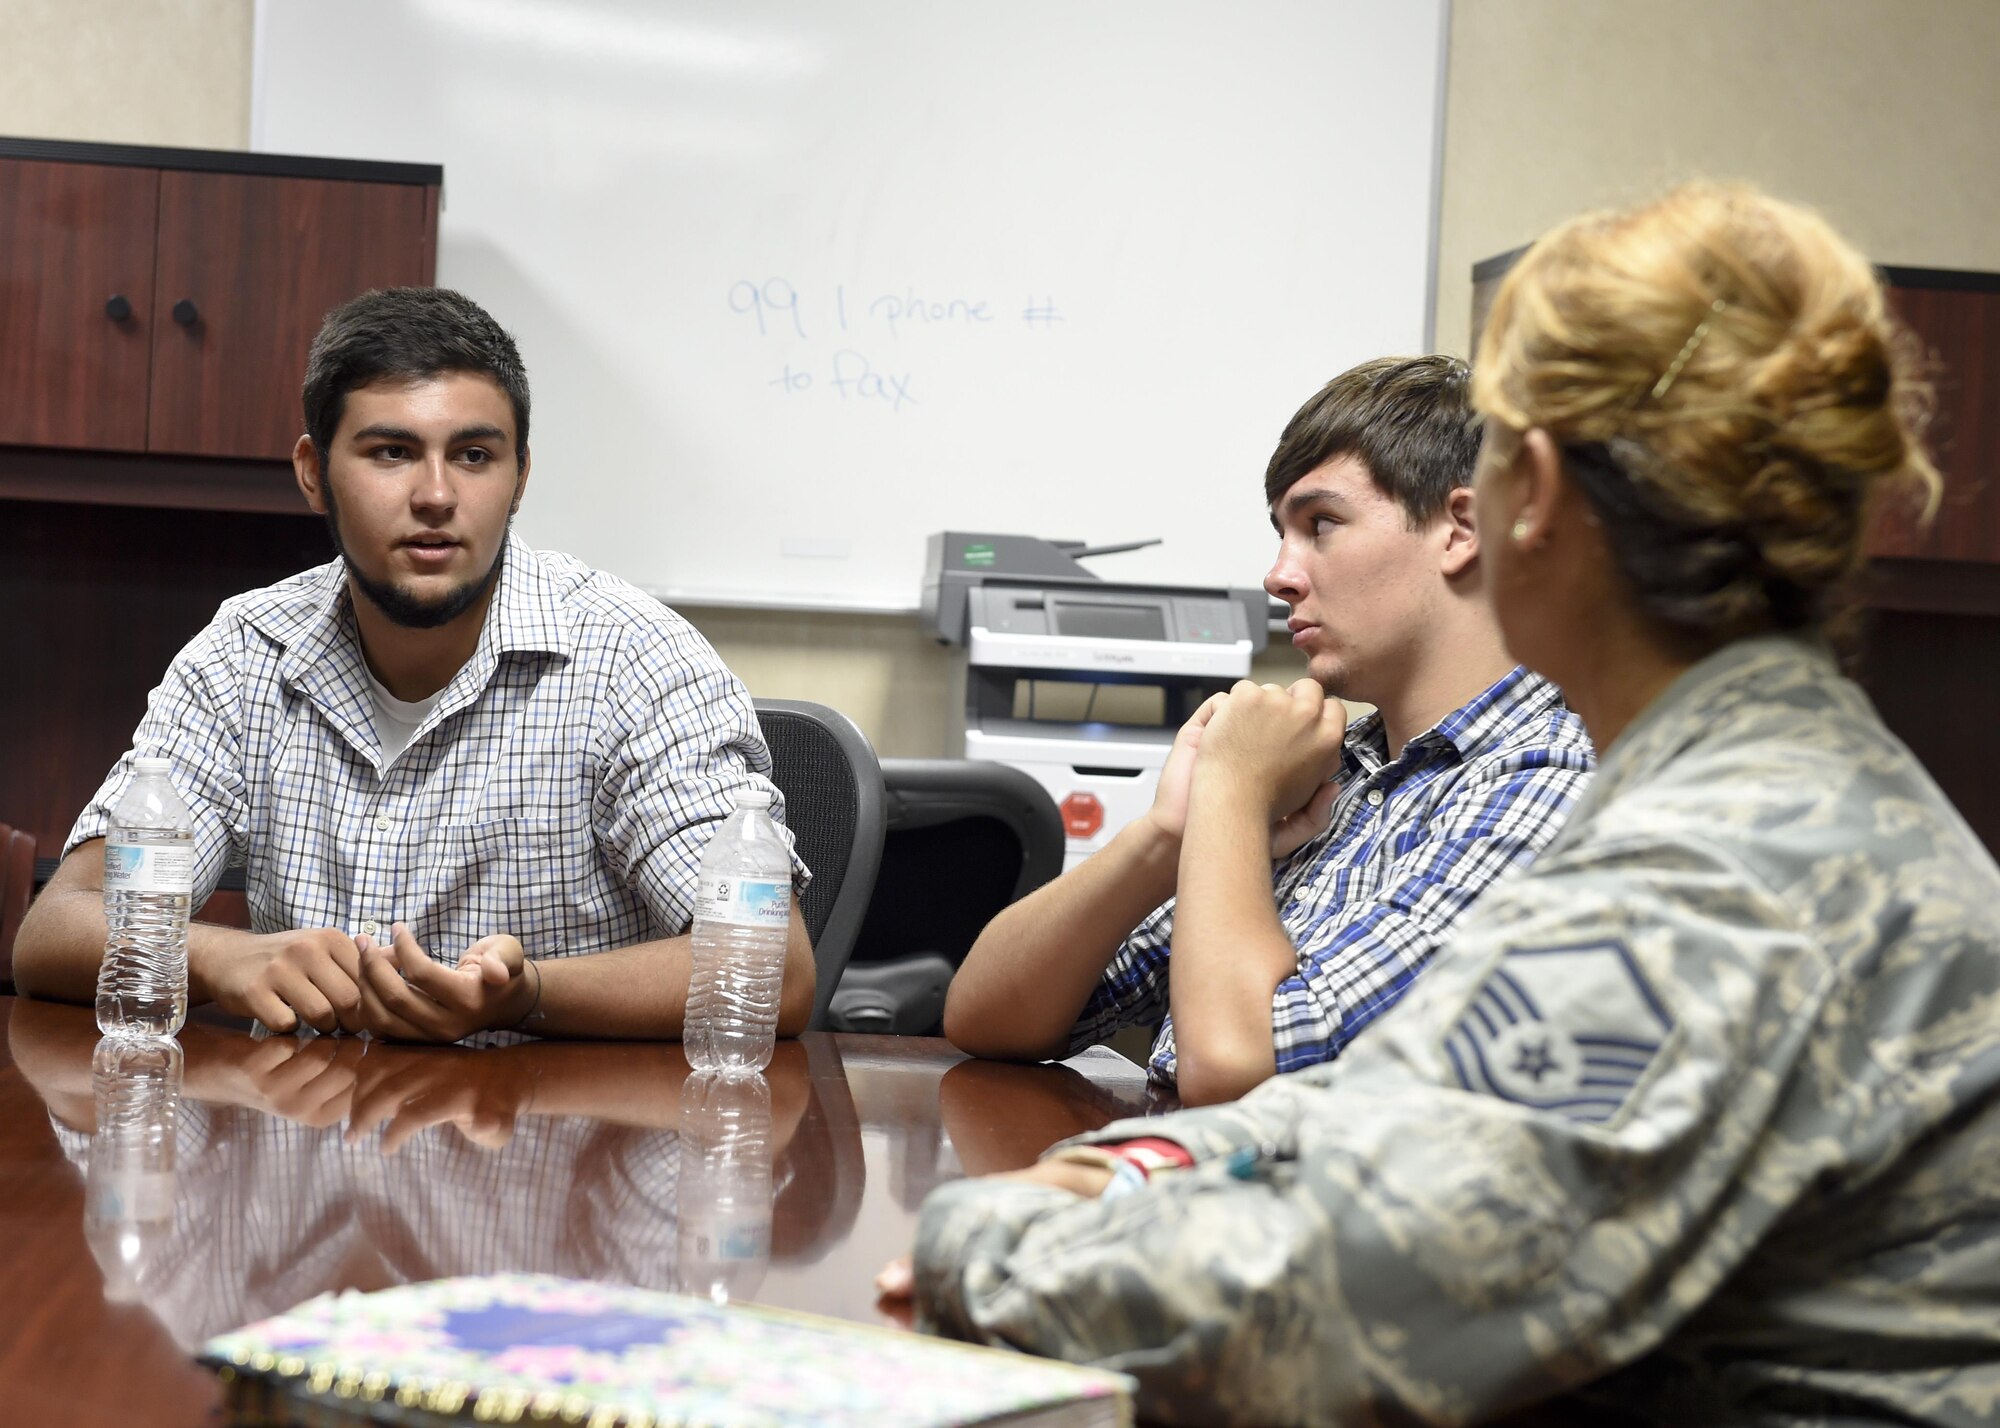 Jeremiah Treadwell, left, and his brother Benjamin, middle, discuss their interest in joining the military with Master Sgt. Caroline Bunce, 628th Aerospace Medical Squadron dental hygienist, during a tour of the Deily Dental Clinic July 25.